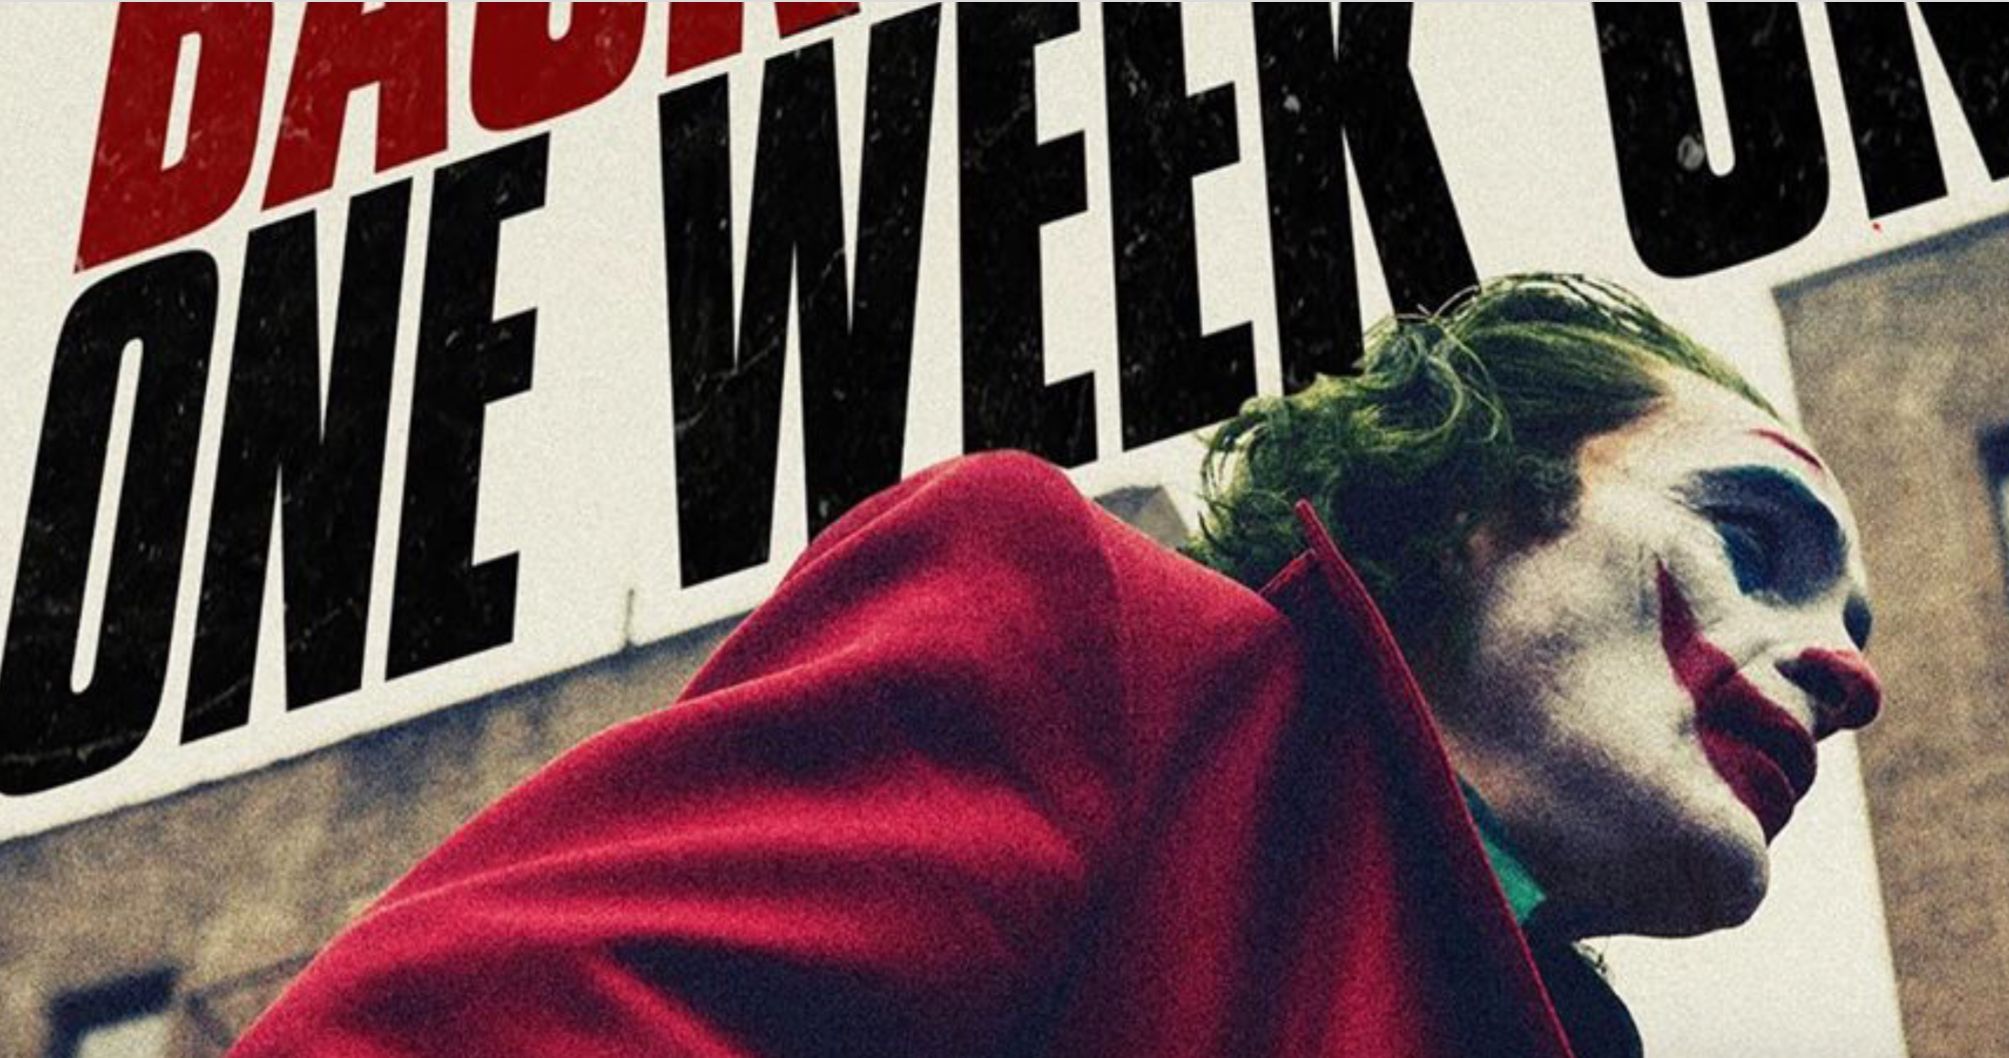 Joker Is Returning to IMAX Theaters for One Week Only